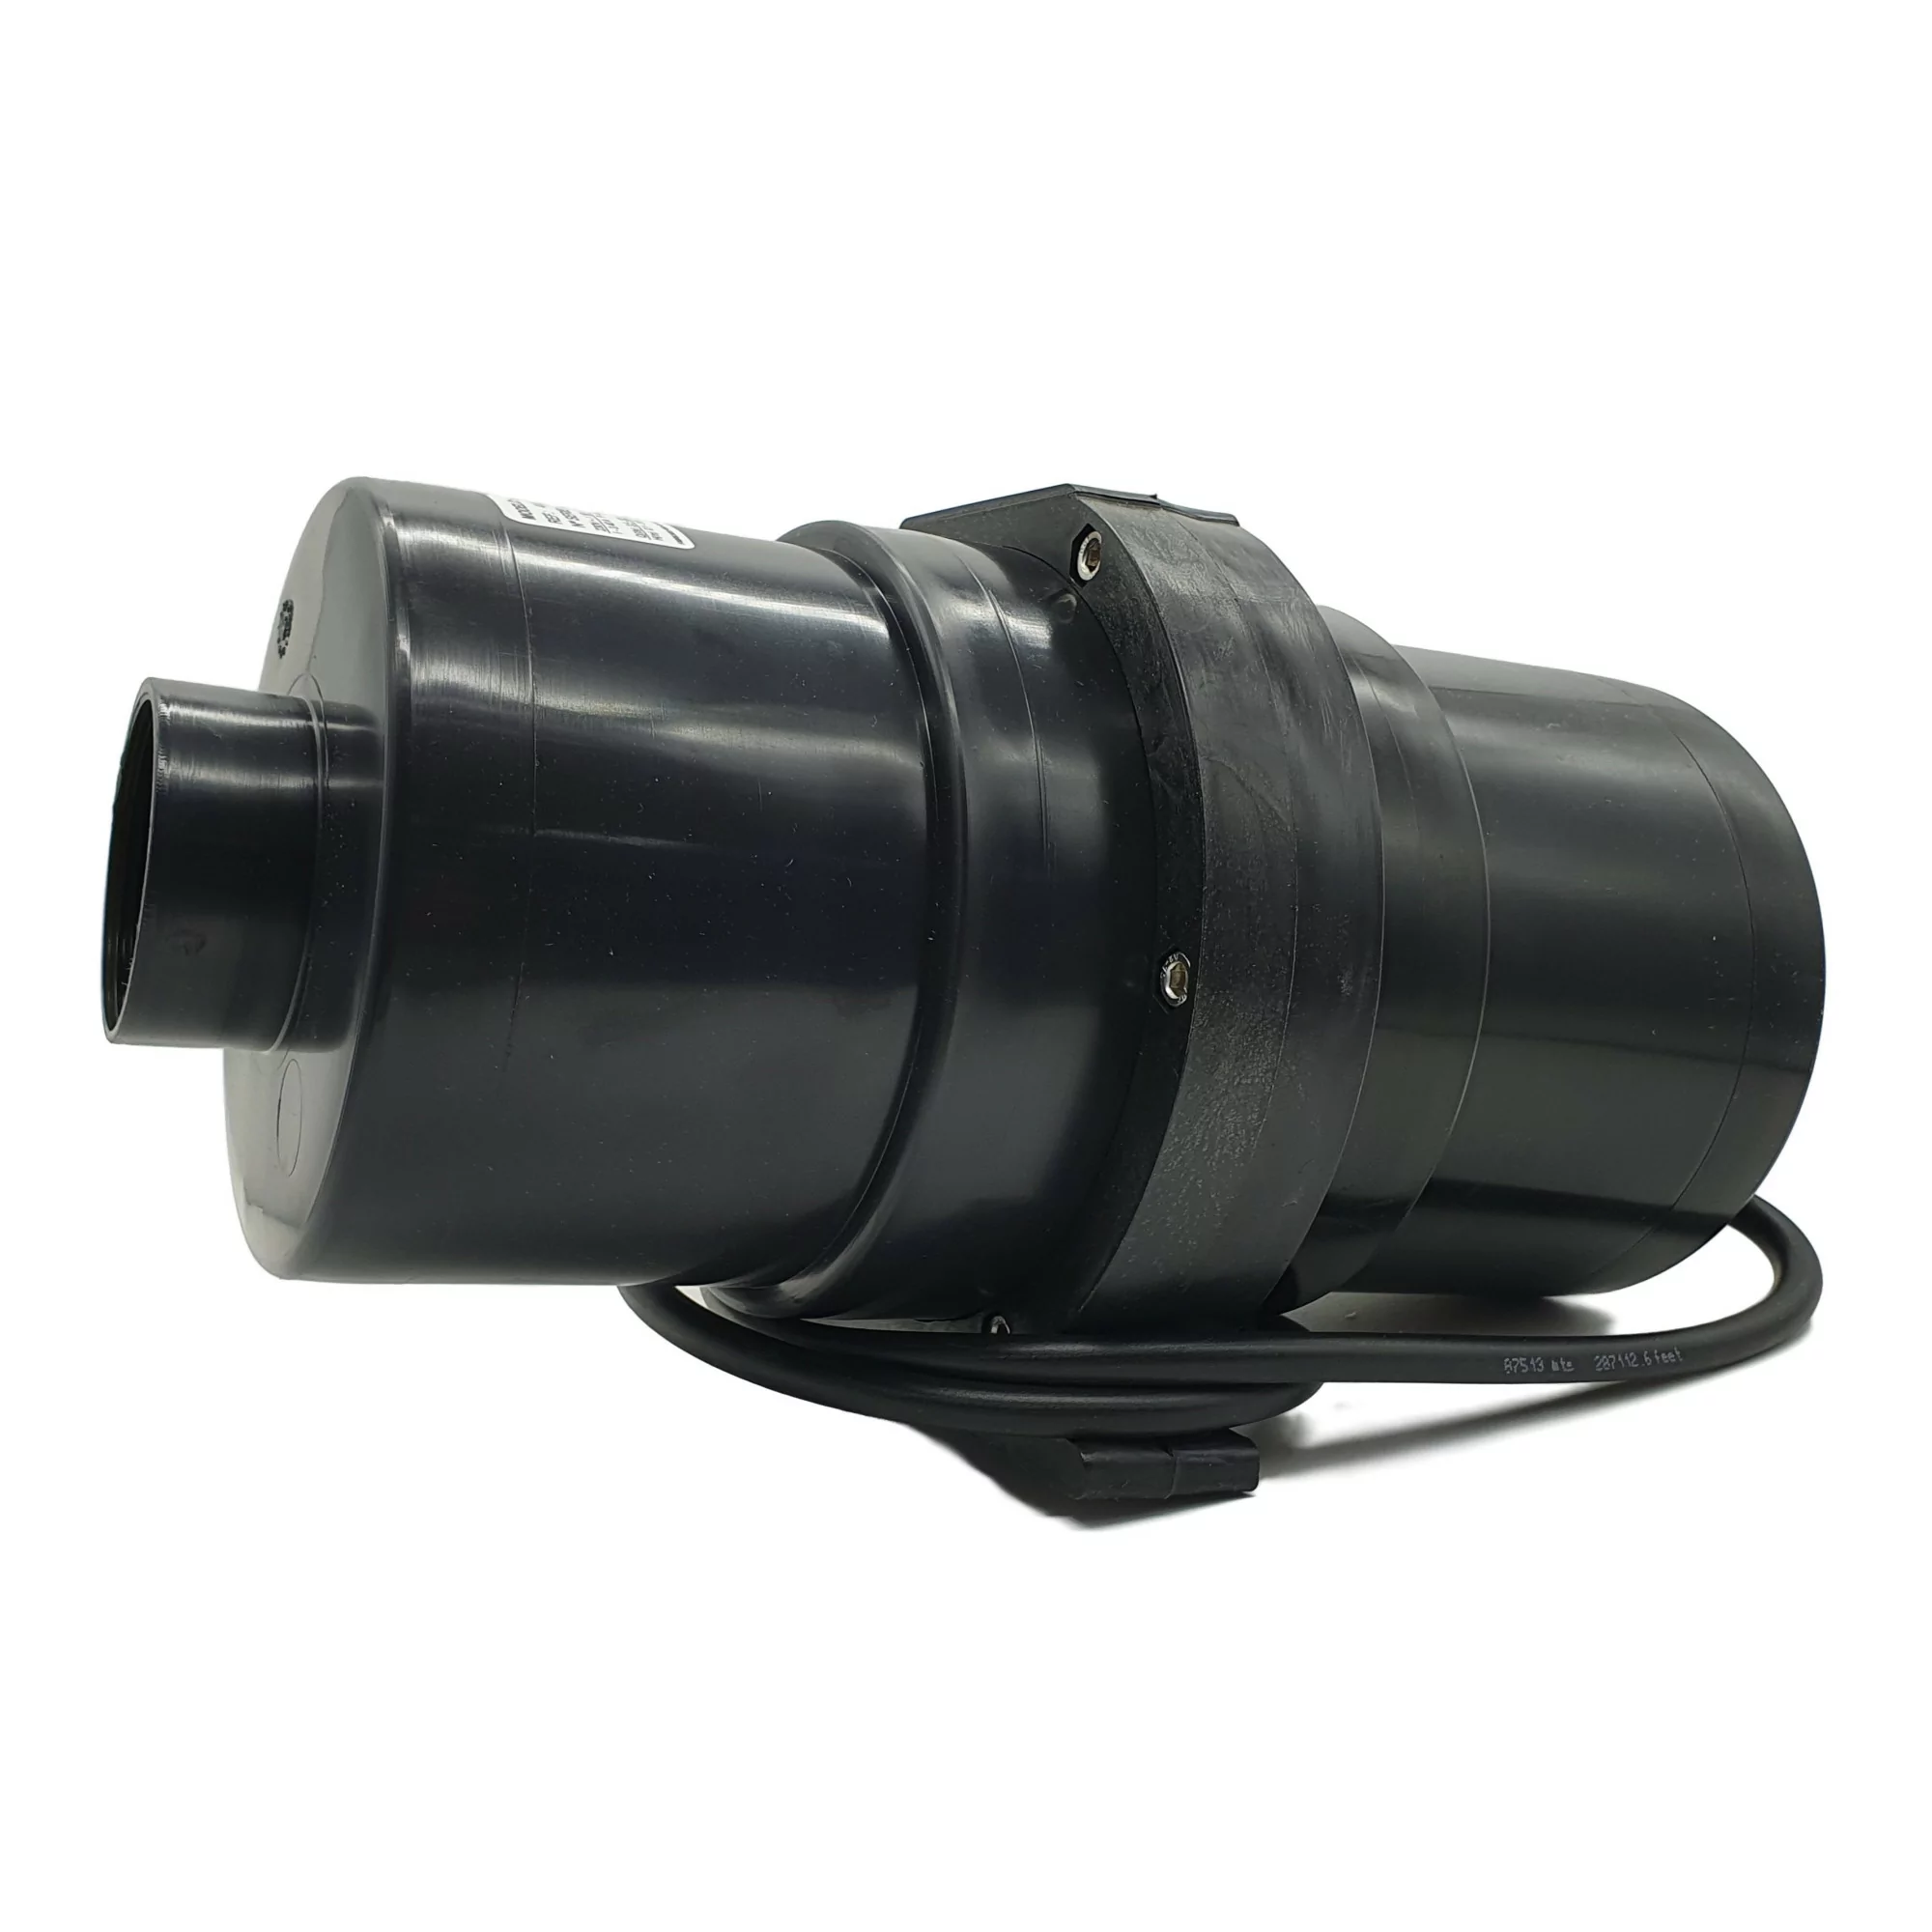 Discontinuous Duty Blower Pump 1.9hp